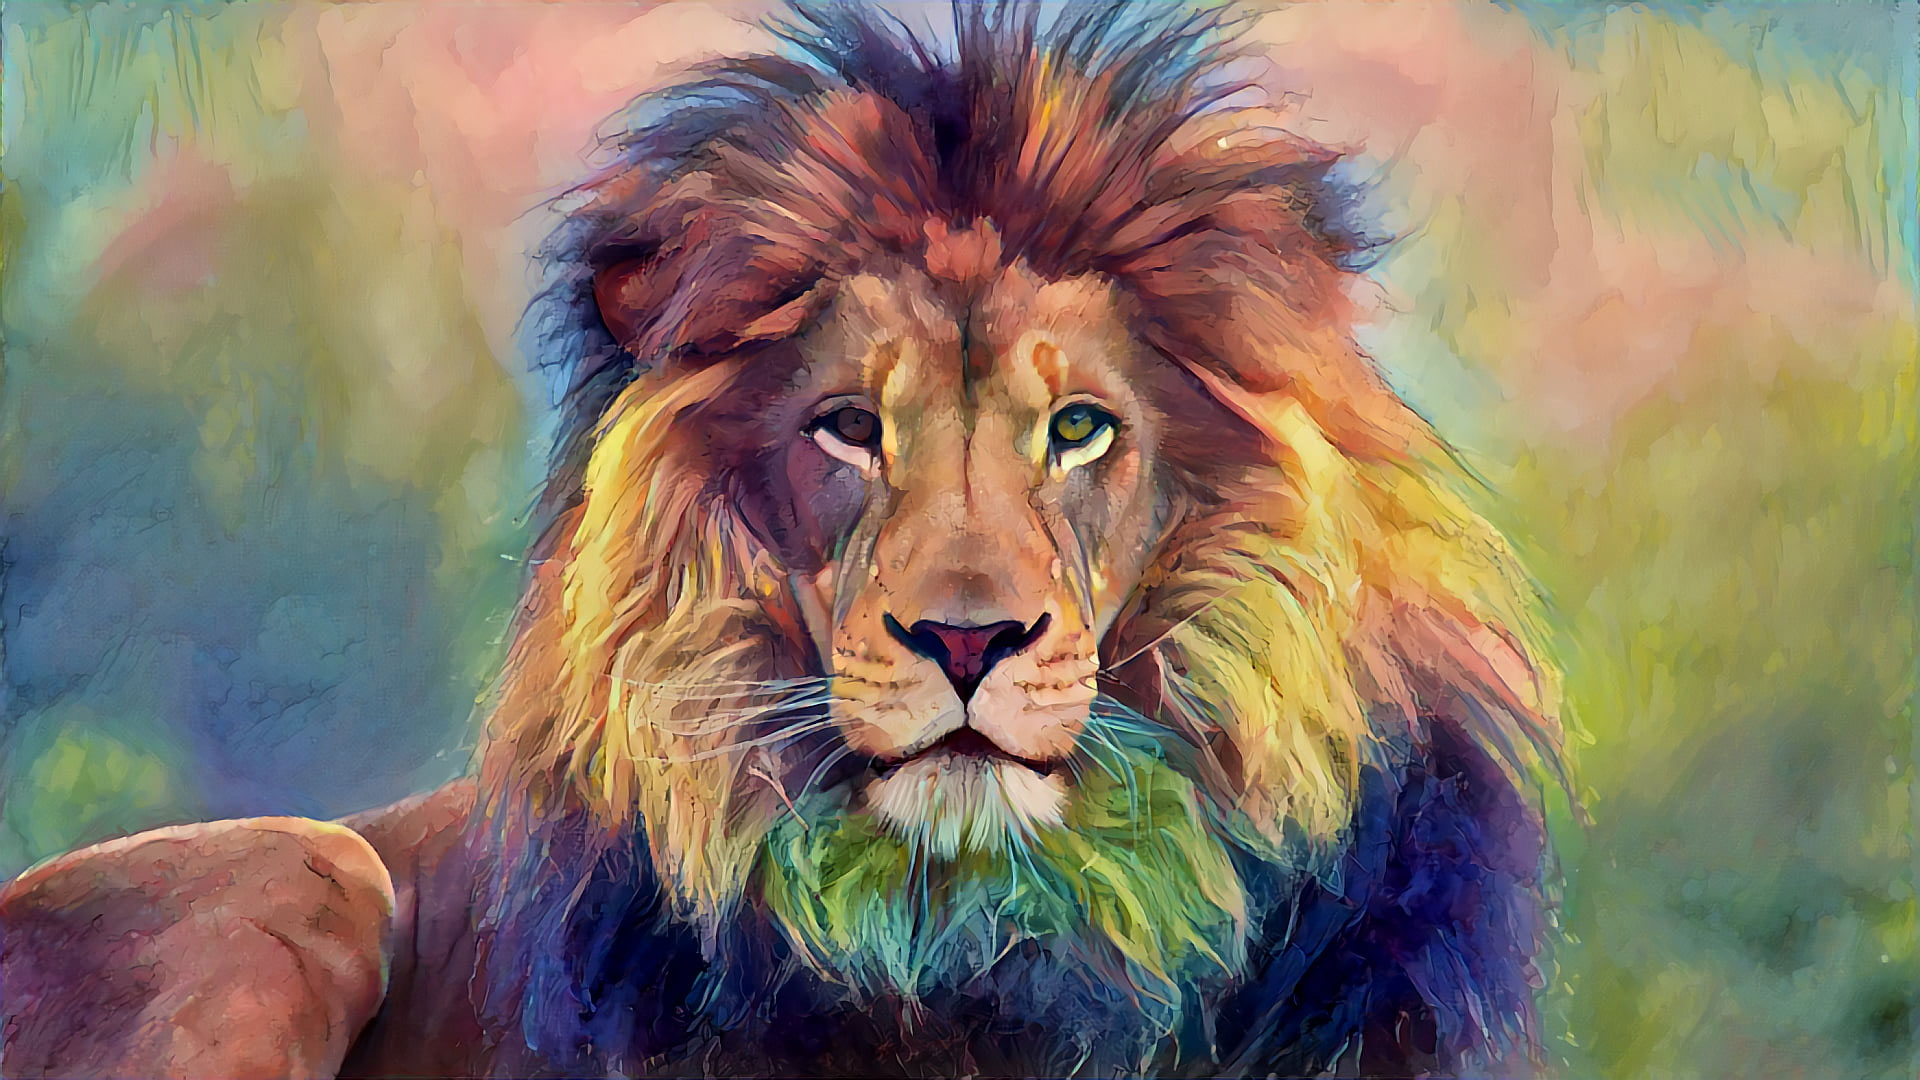 Lion painting wallpaper, animals, wildlife, portrait, animal themes, looking at camera